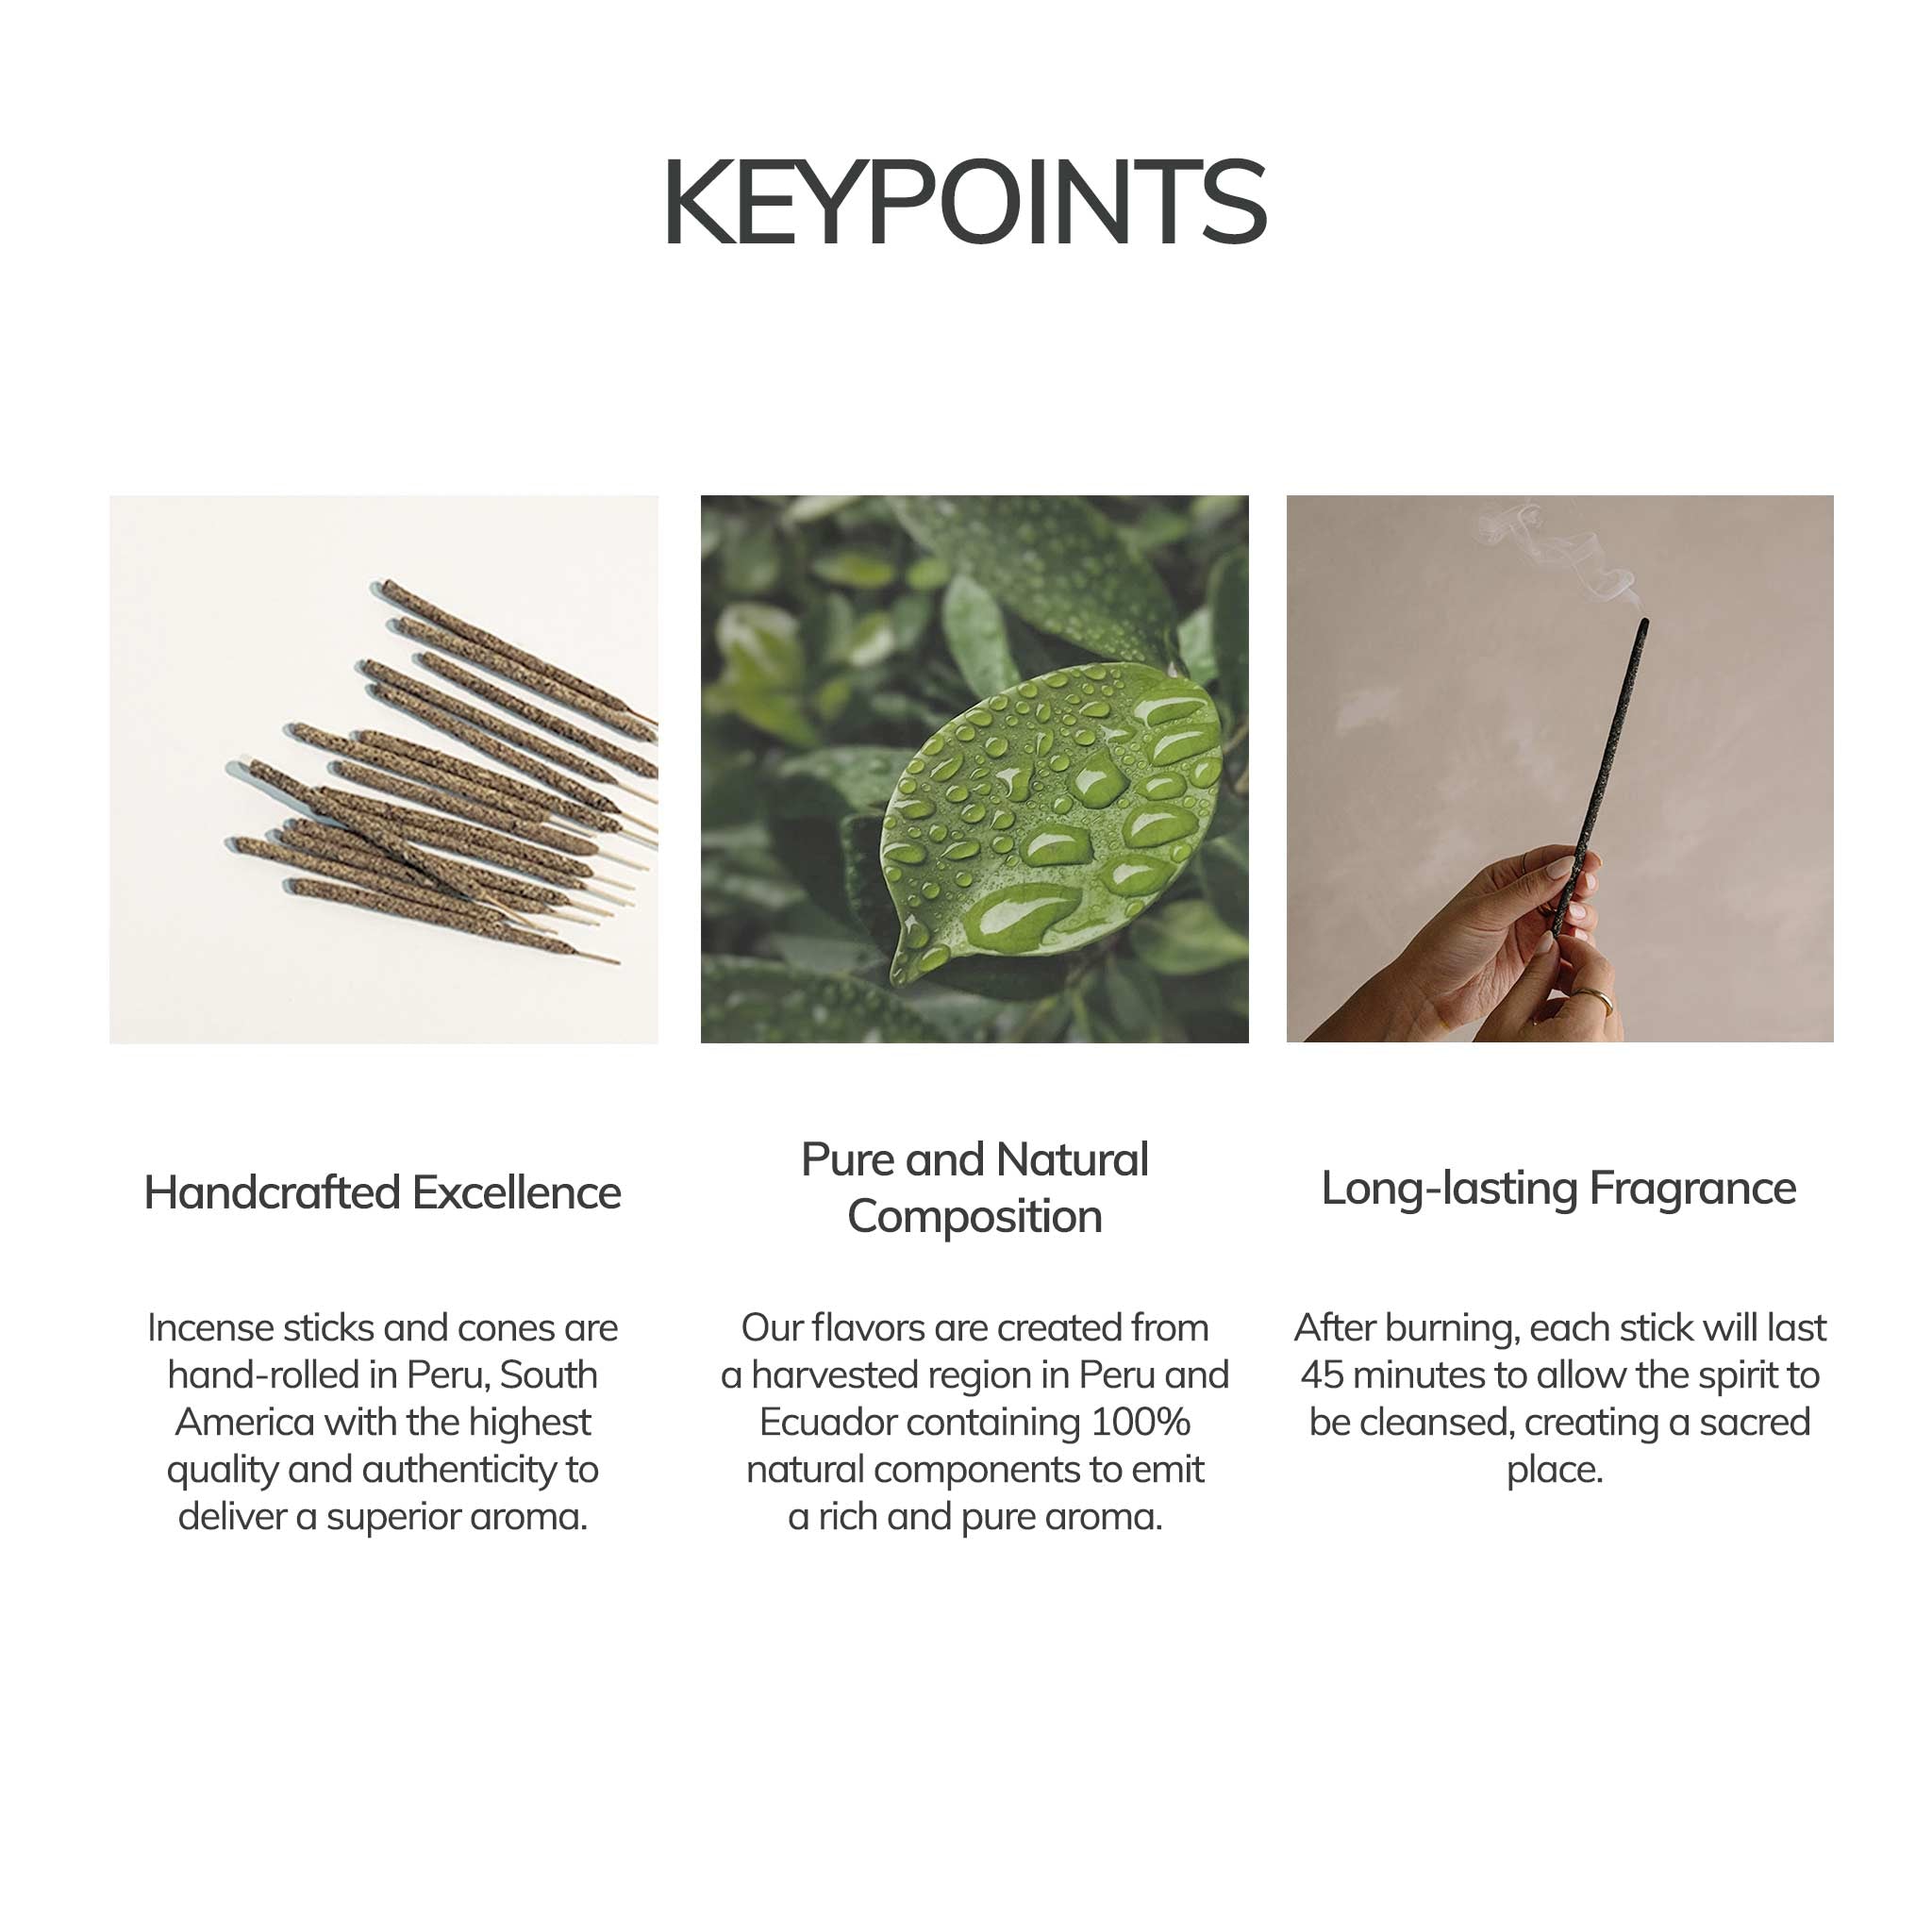 1. mini incense sticks 2. natural leaves with droplets 3. holding burning incense stick.